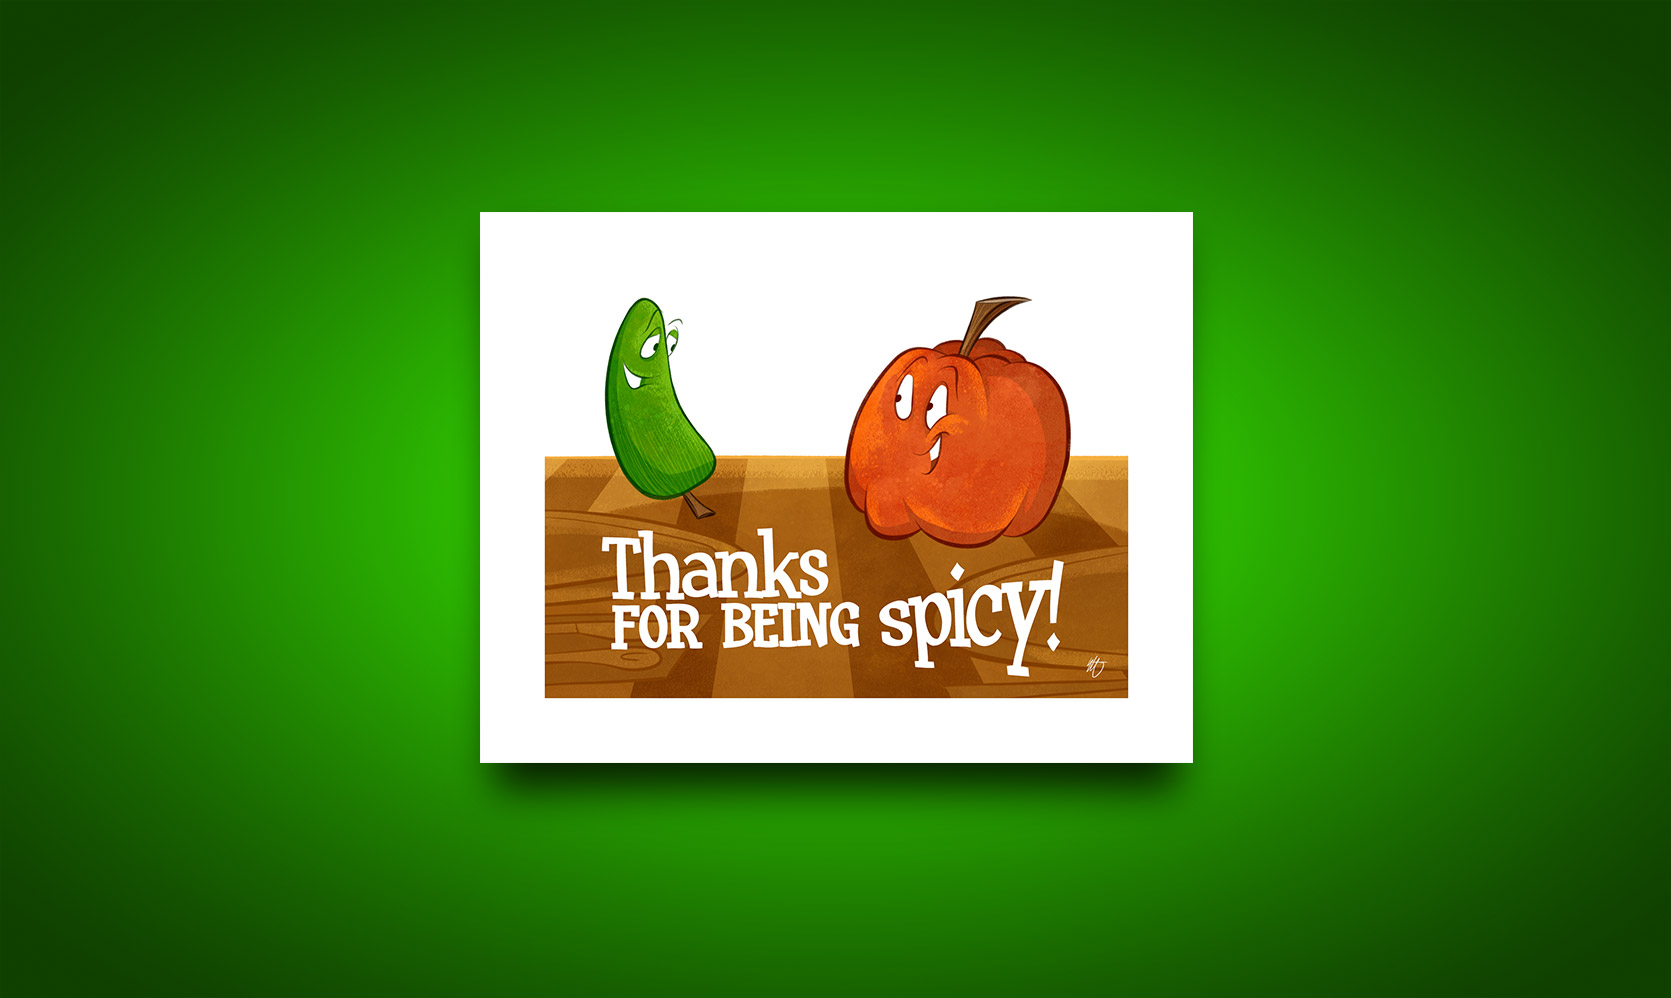 Thanks for being spicy – Greeting card design available on Etsy